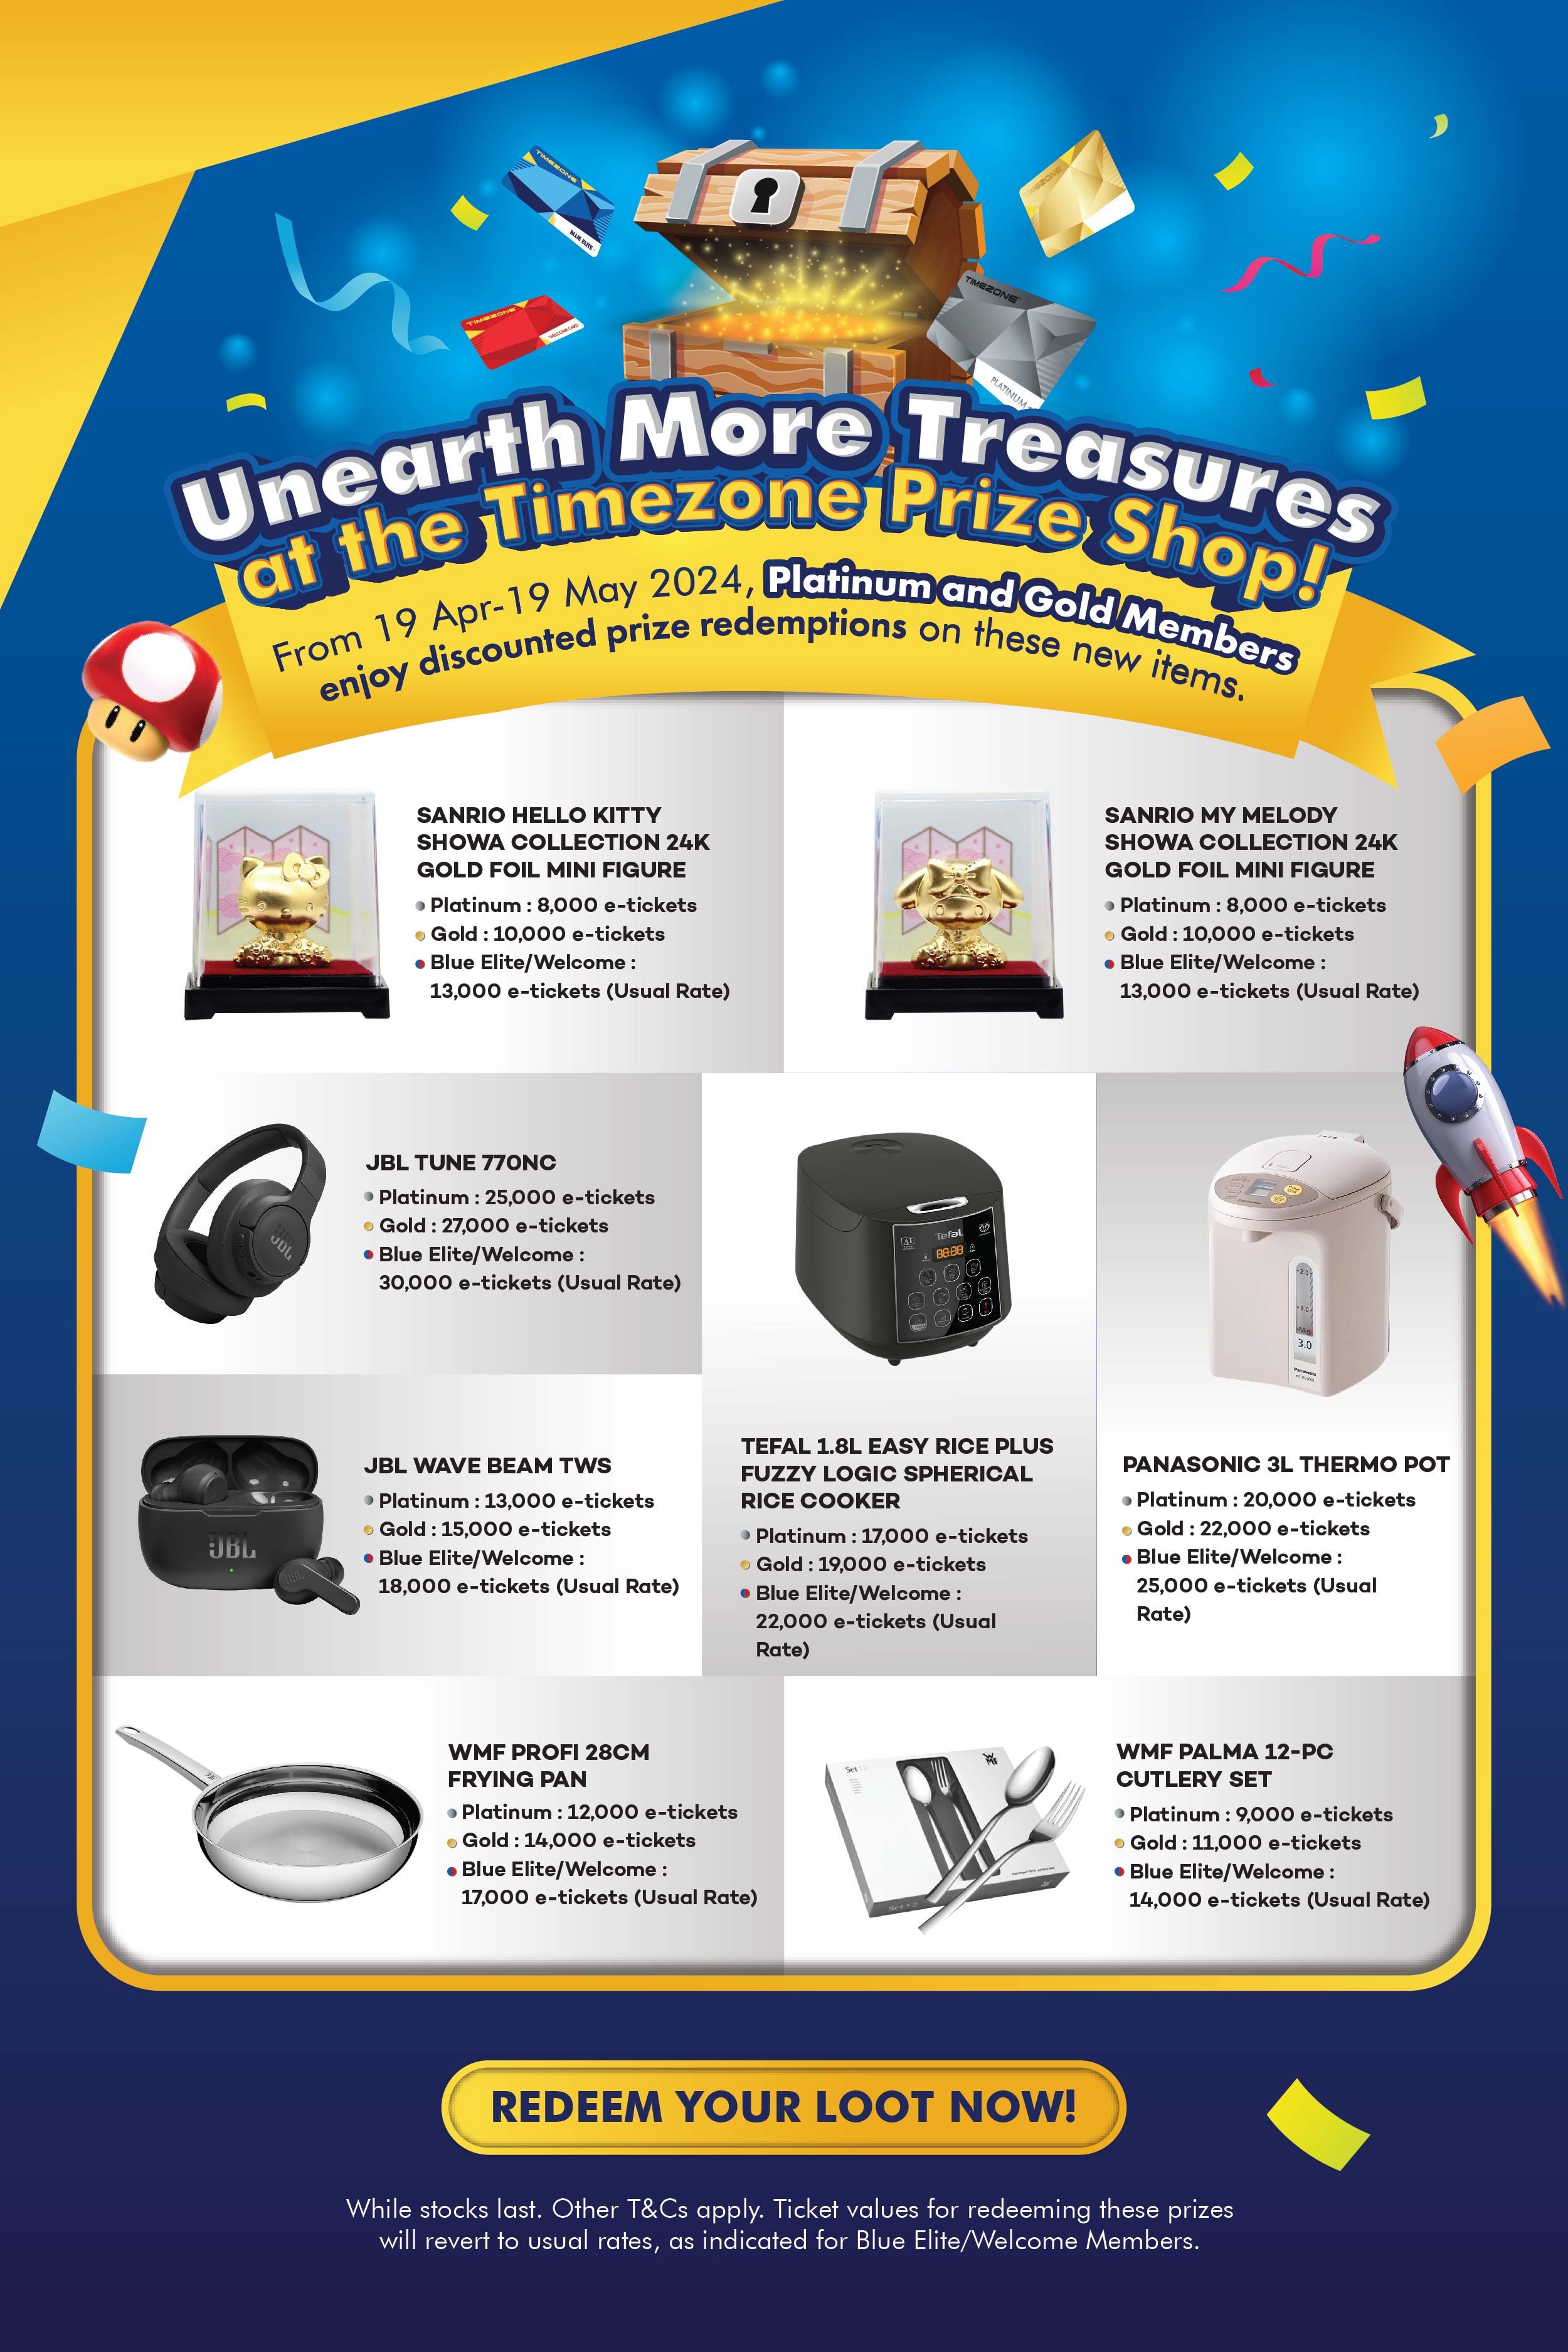 Unearth More Treasures at the Timezone Prize Shop!